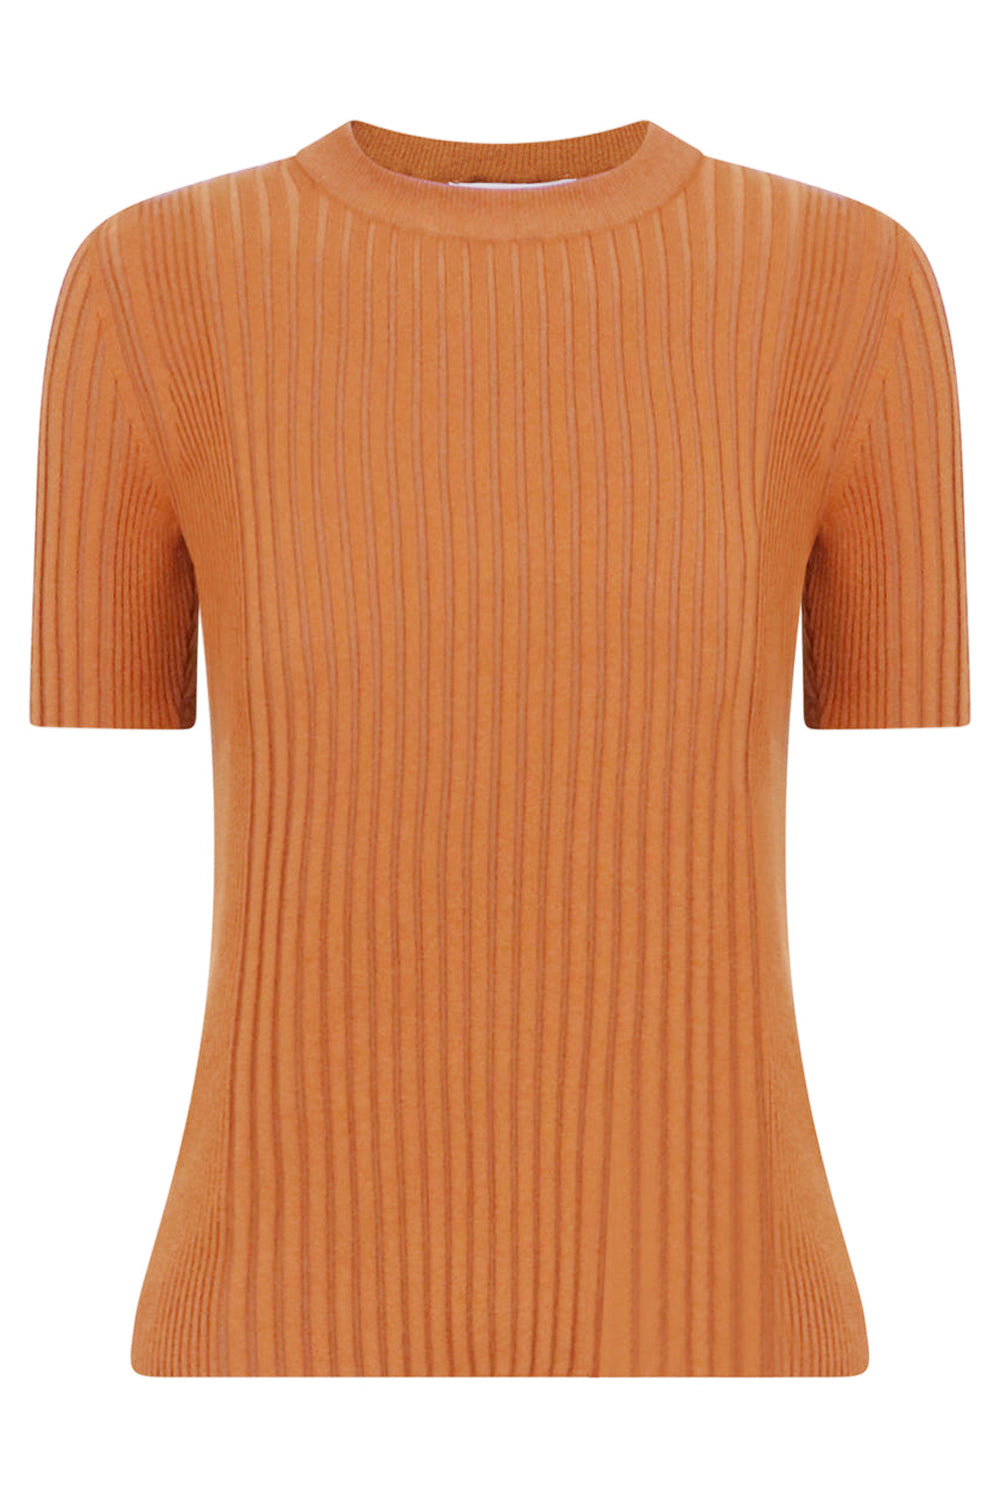 RABANNE RTW BUTTON RIBBED SHORT SLEEVE KNIT TOP | CAMEL